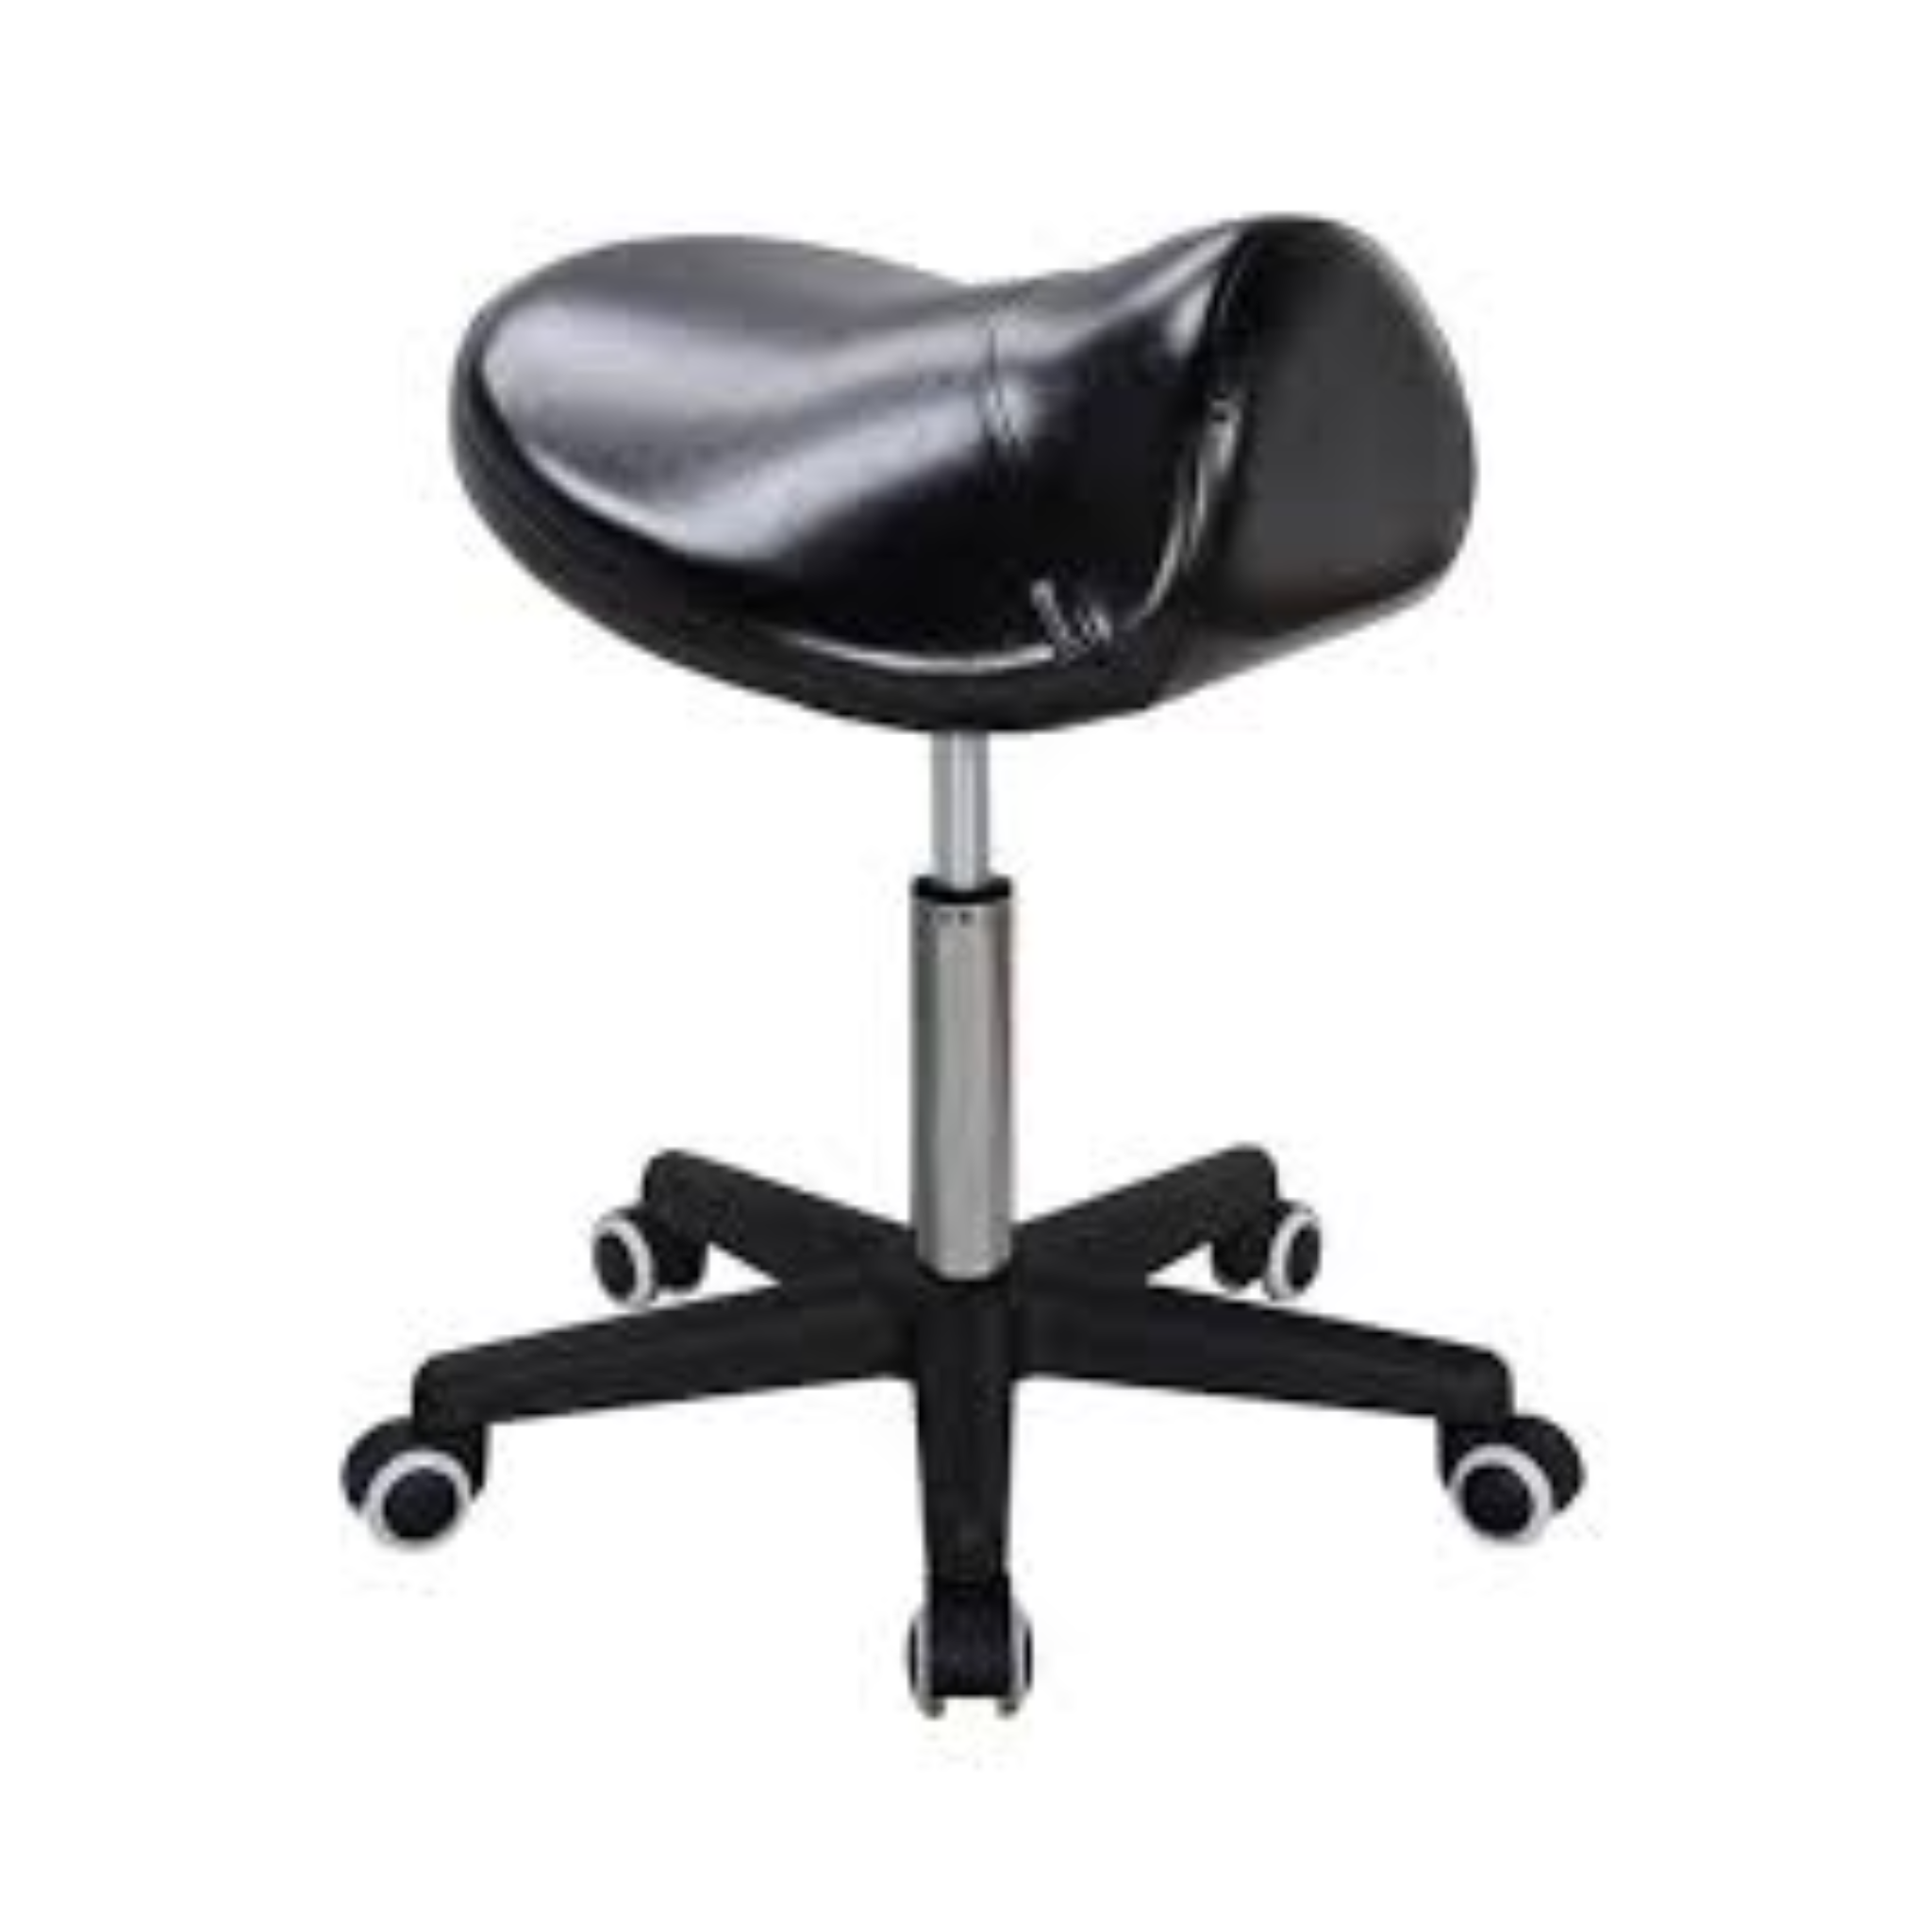 Master Pneumatic Rolling Saddle Stool for Wellness Practitioners at Spas, Clinics & other Practices